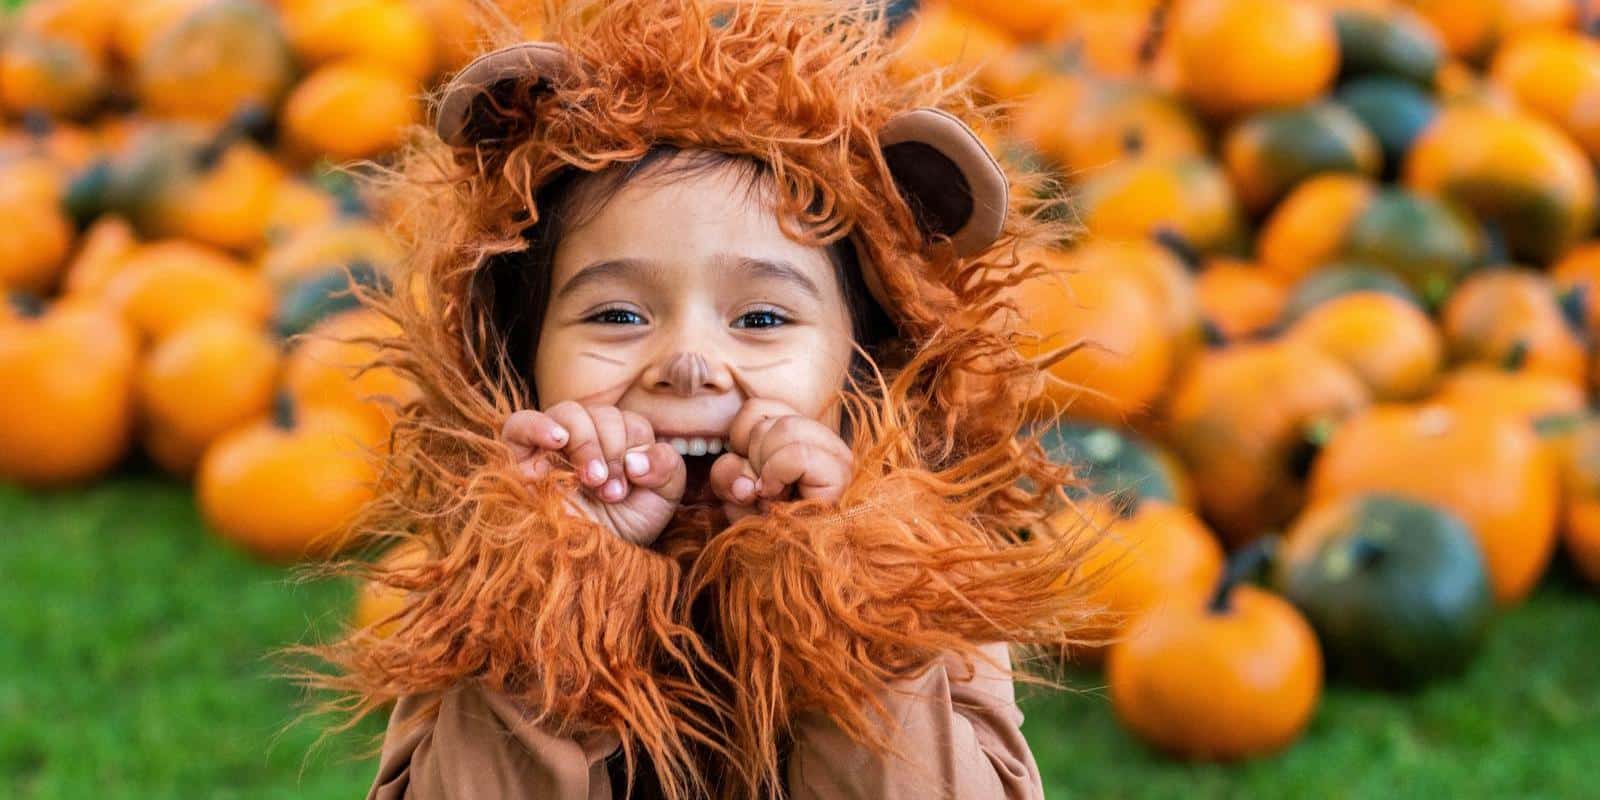 young girl dressed up as a lion sitting in a pumpkin patch, her hands are up near her face as if she is pretending to be a lion